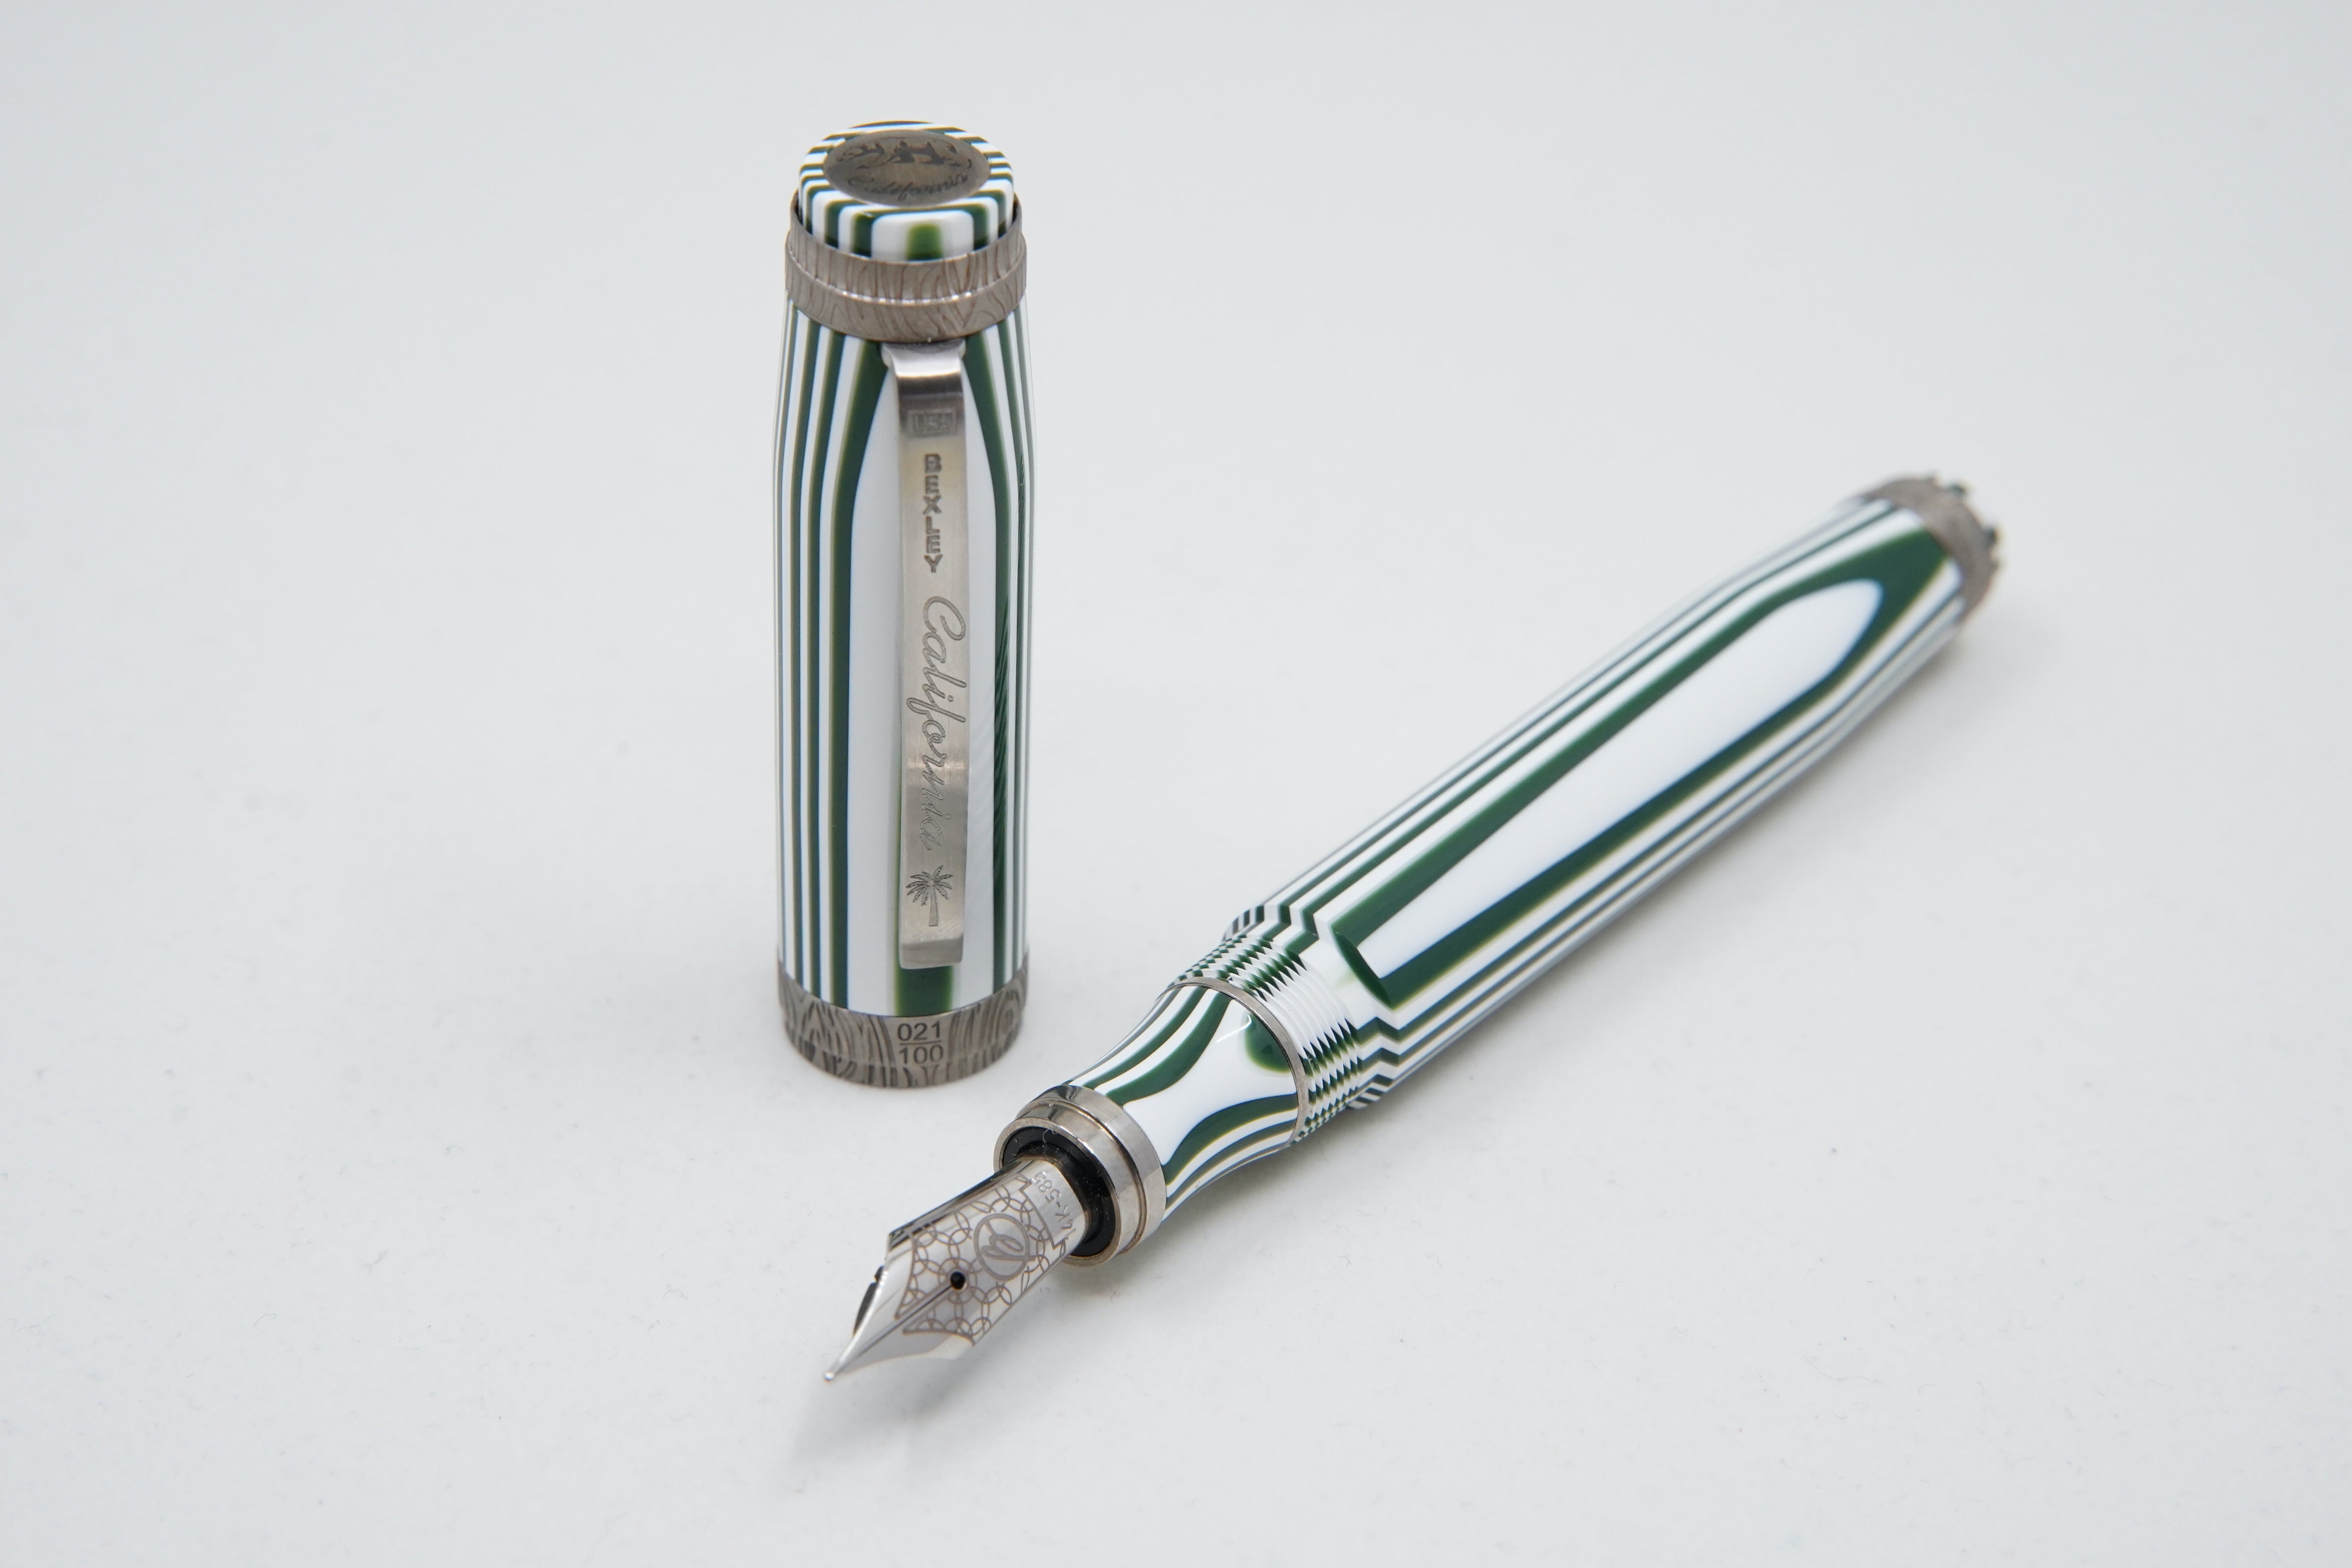 NEW! Bexley California Silver Trim Limited Edition of 50 Pens